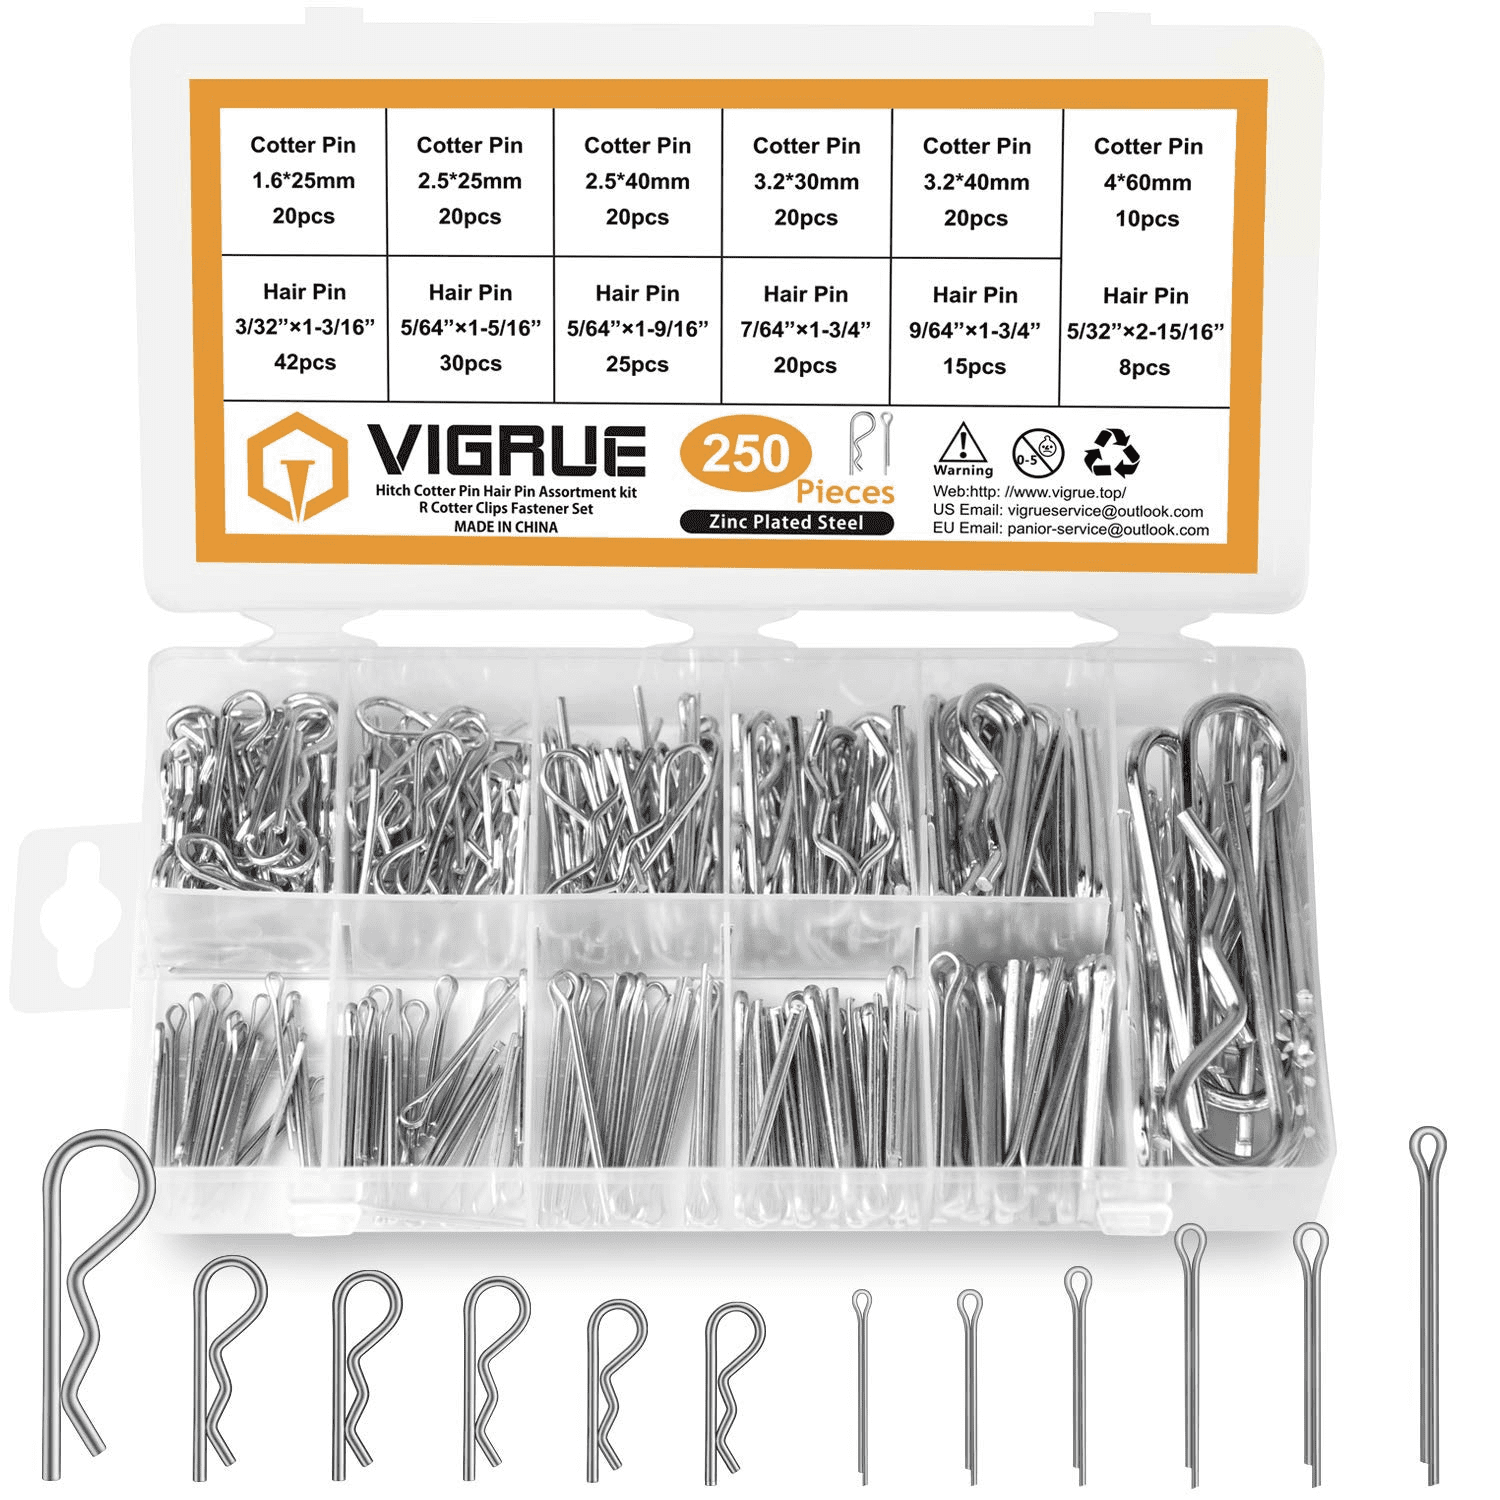 VIGRUE 250PCS Cotter Pin Hairpin Assortment Kit Zinc Plated Steel Hitch Pin  Hair Pins R Clips Fastener Set Multiple Sizes 